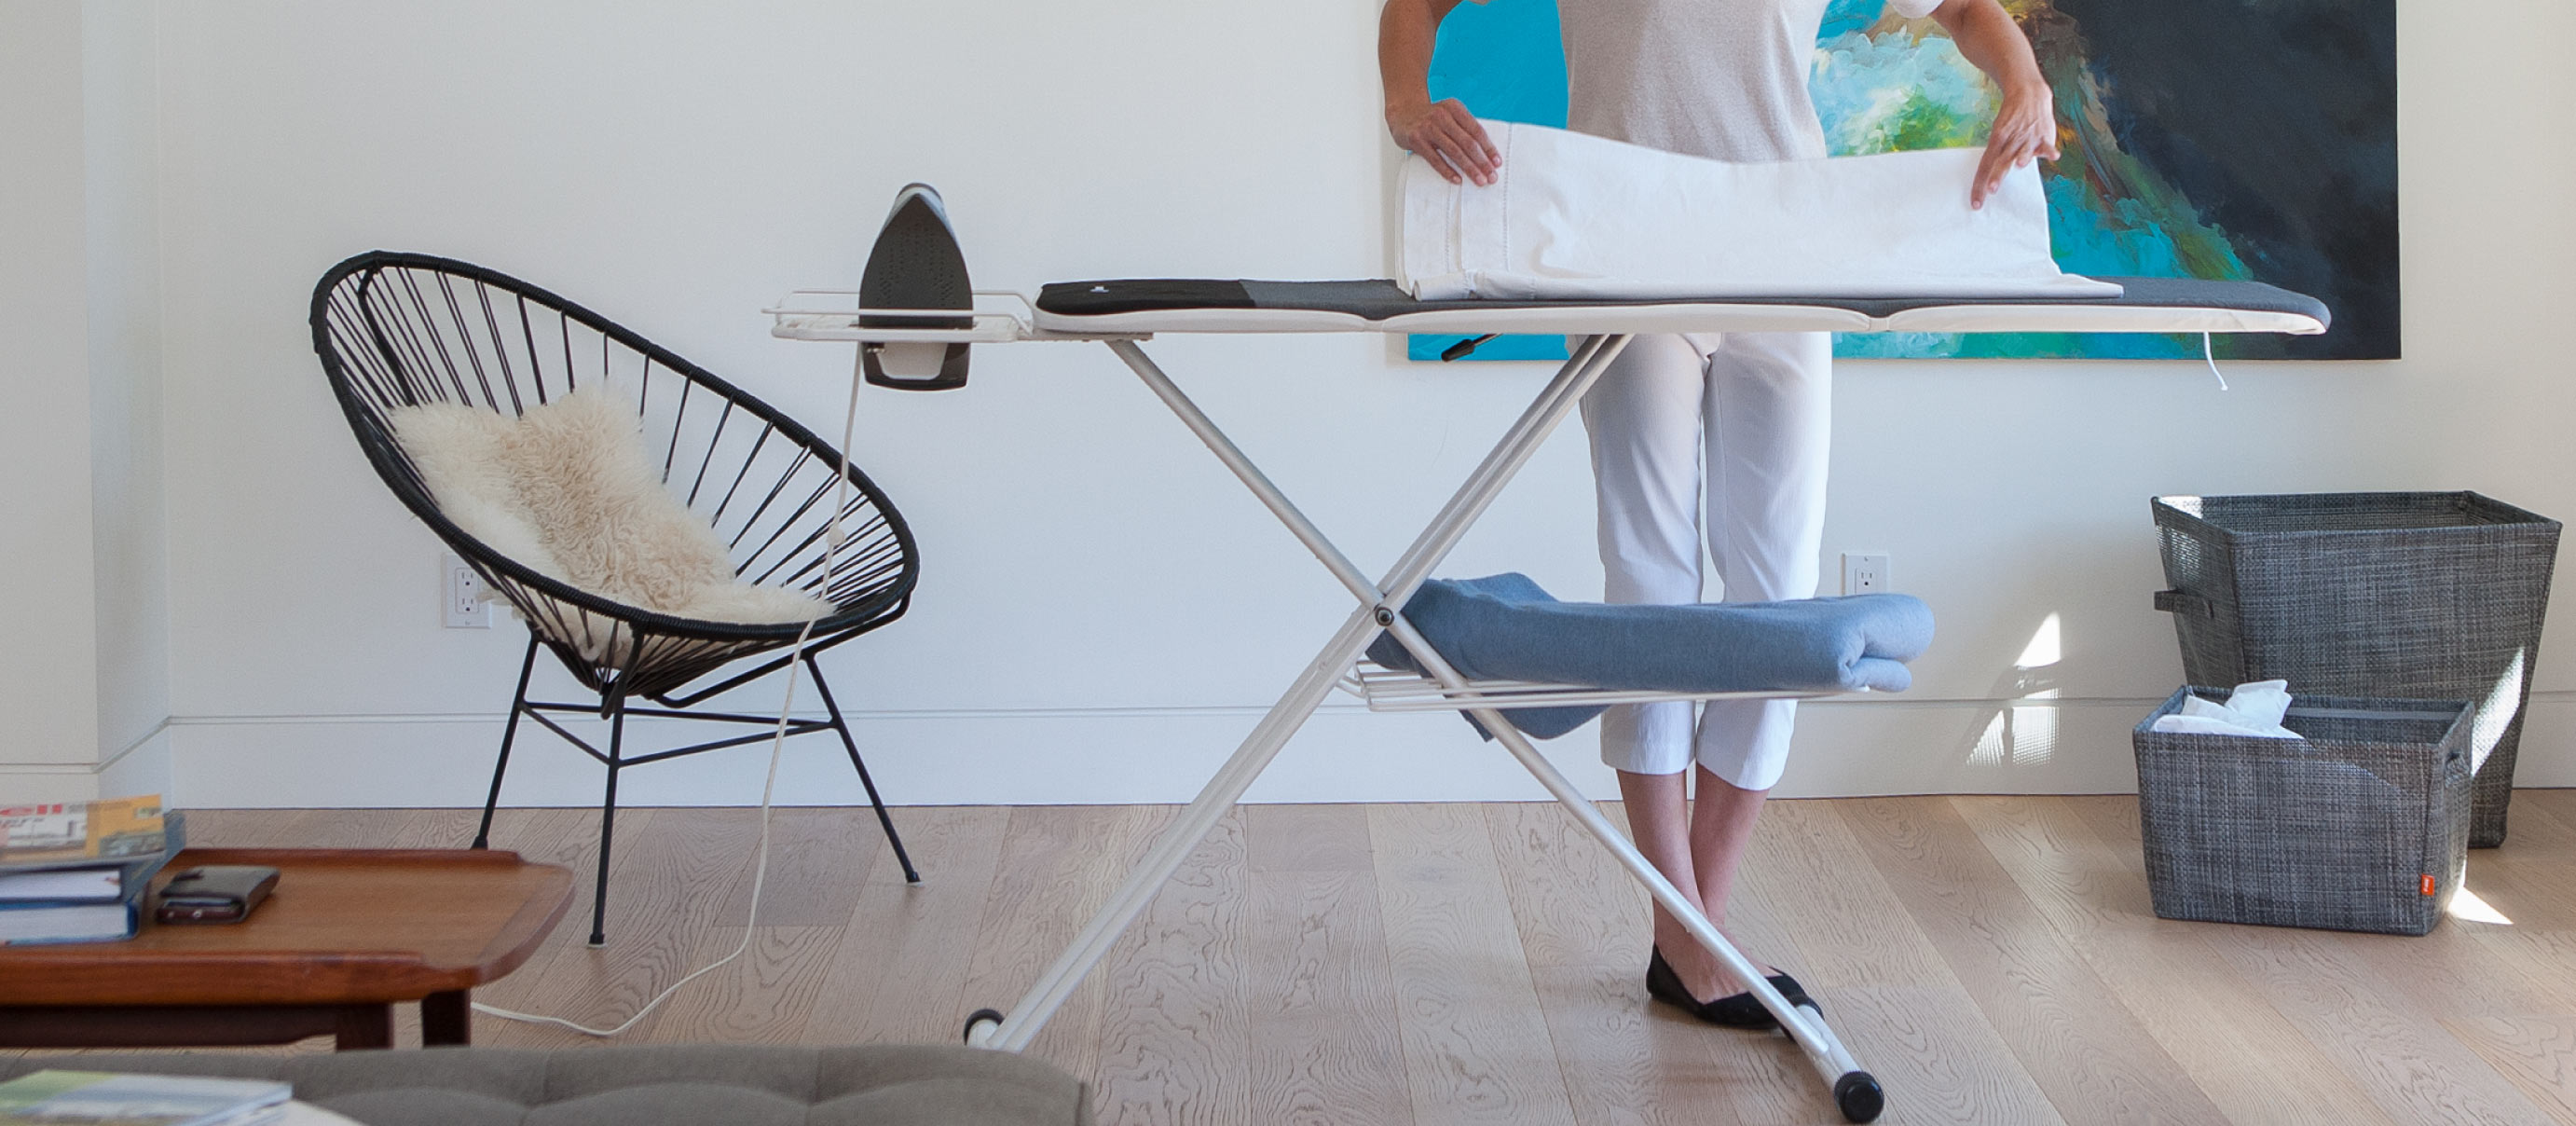 Home Ironing Boards